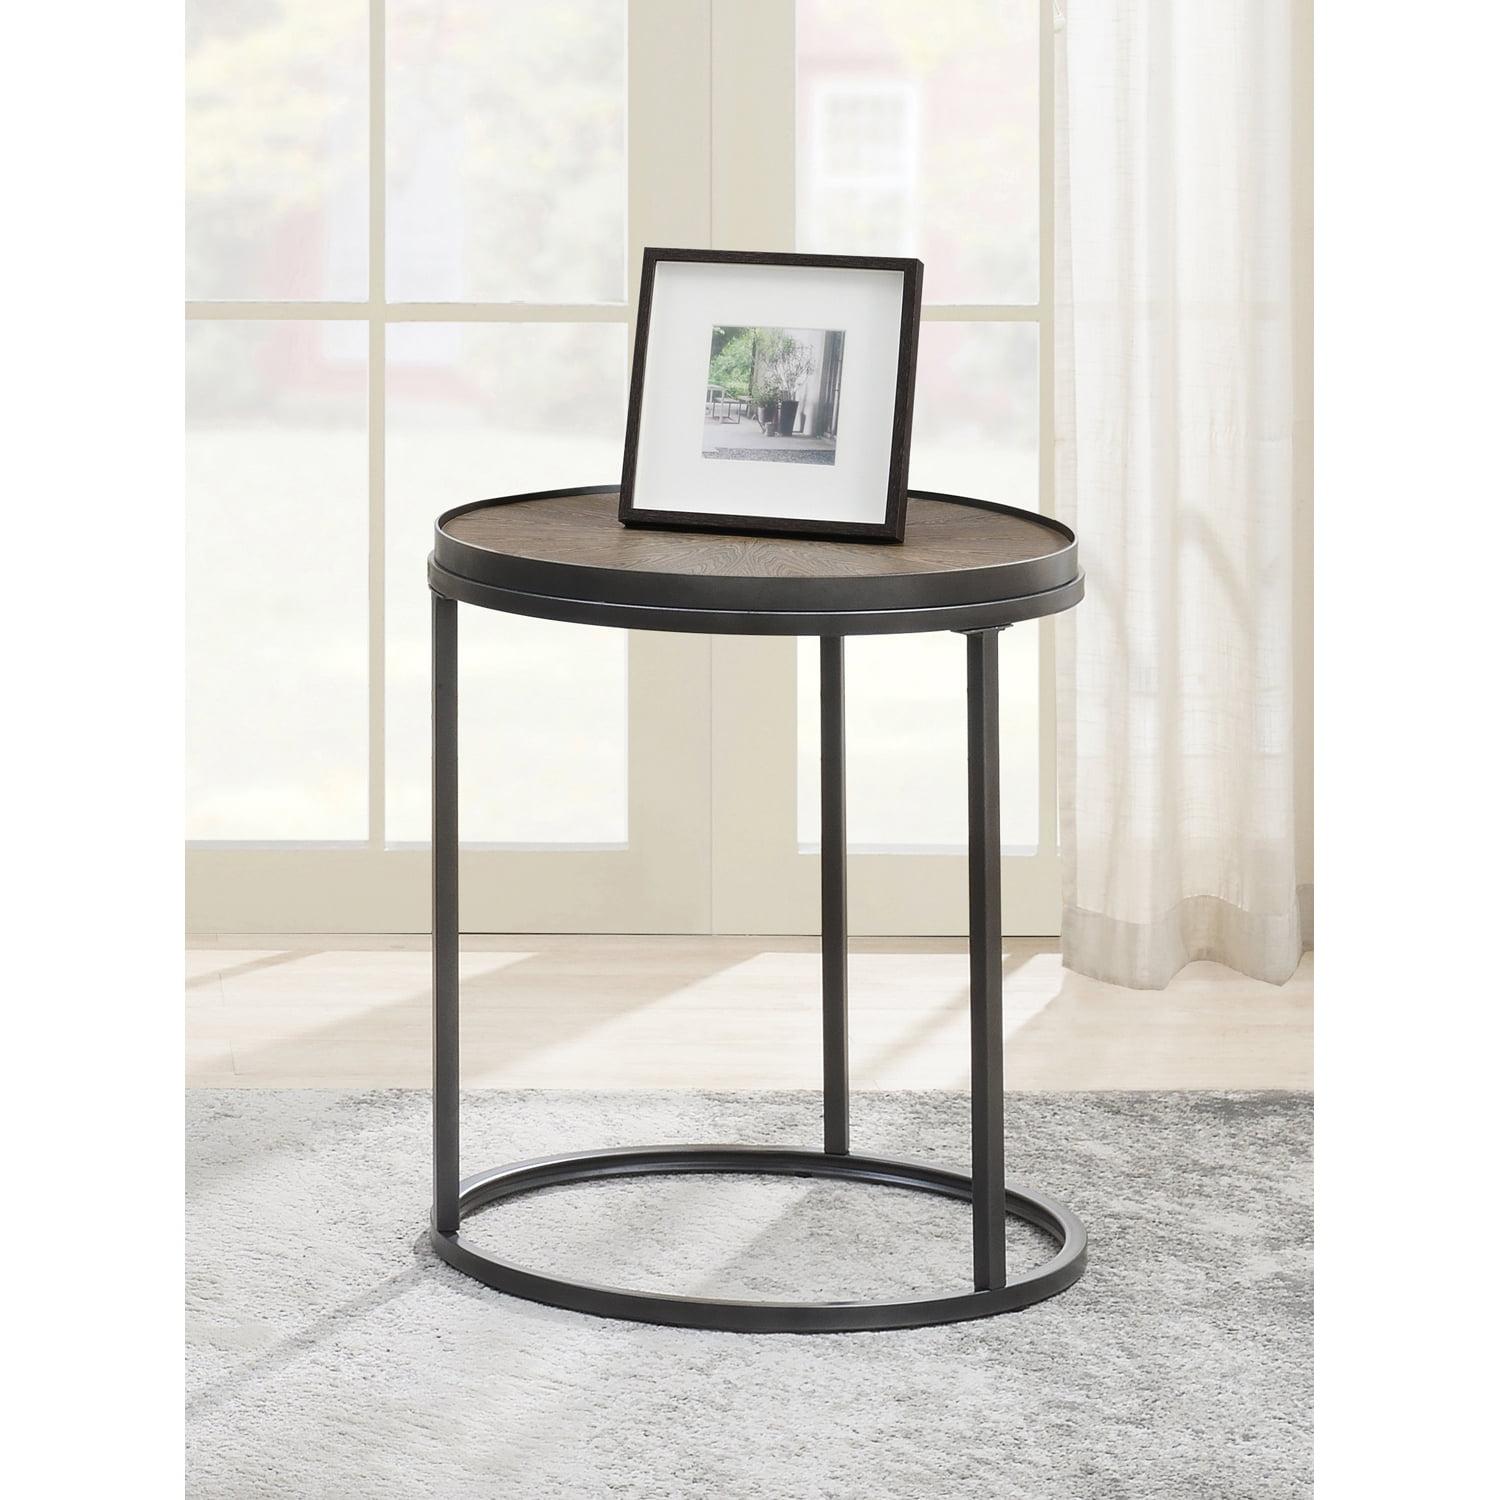 Transitional Gunmetal and Weathered Elm 22" Round End Table